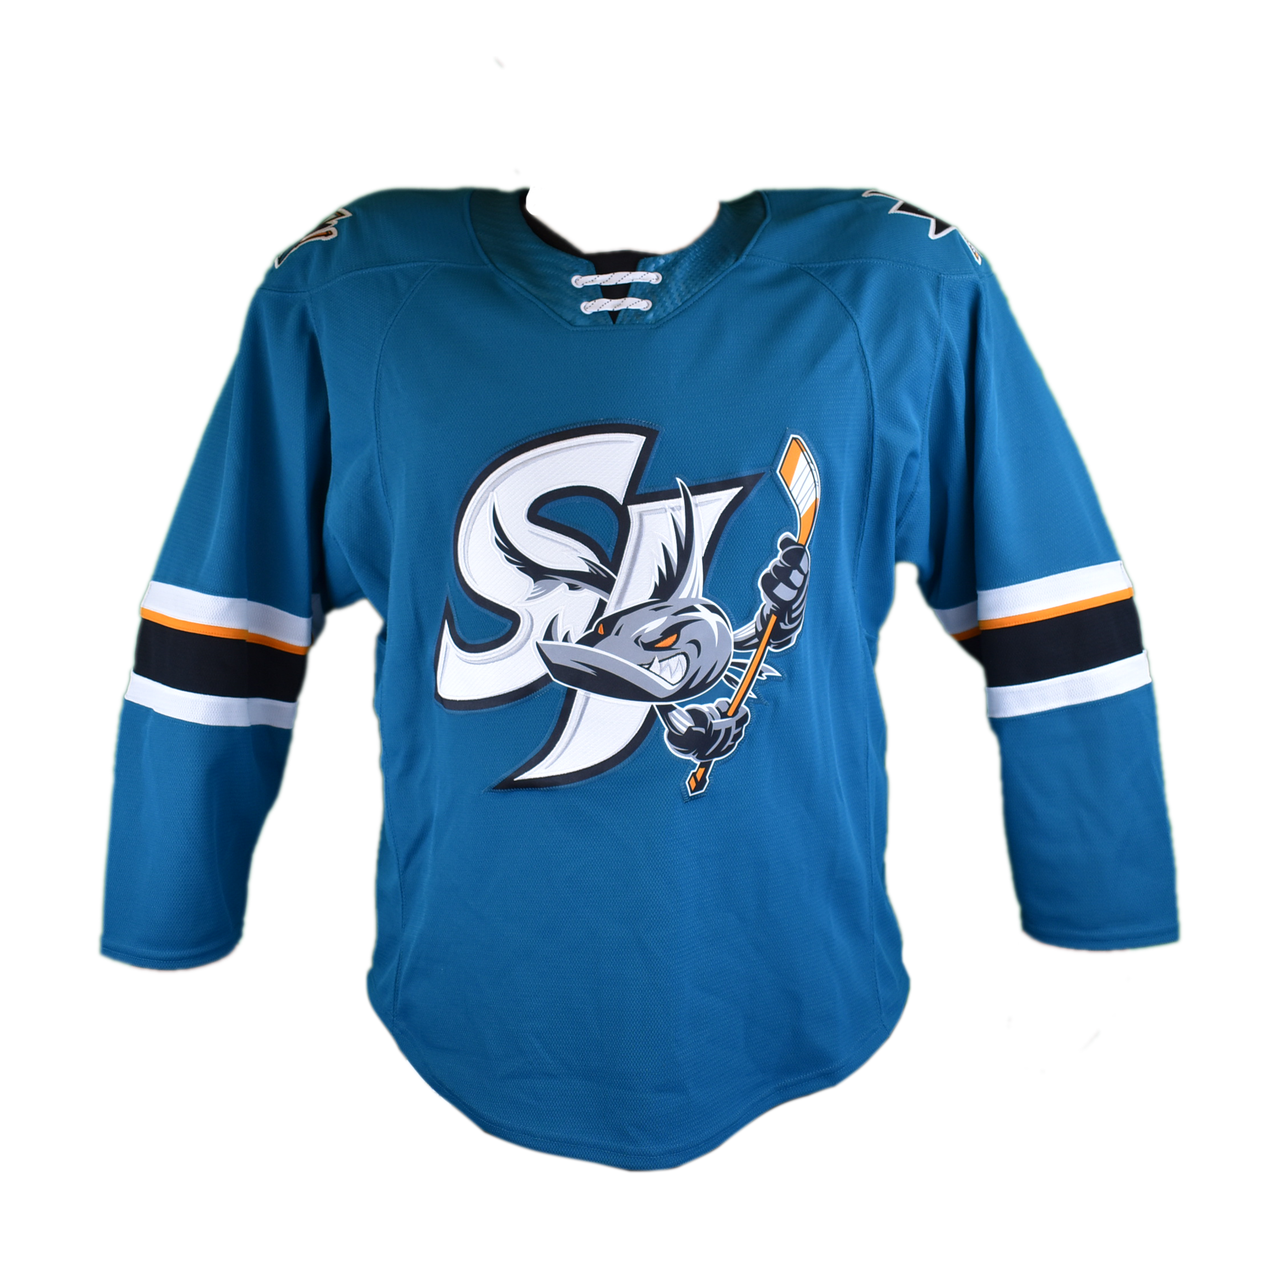 Barracuda Steel Jersey  Introducing the “Steel” Jersey. The third